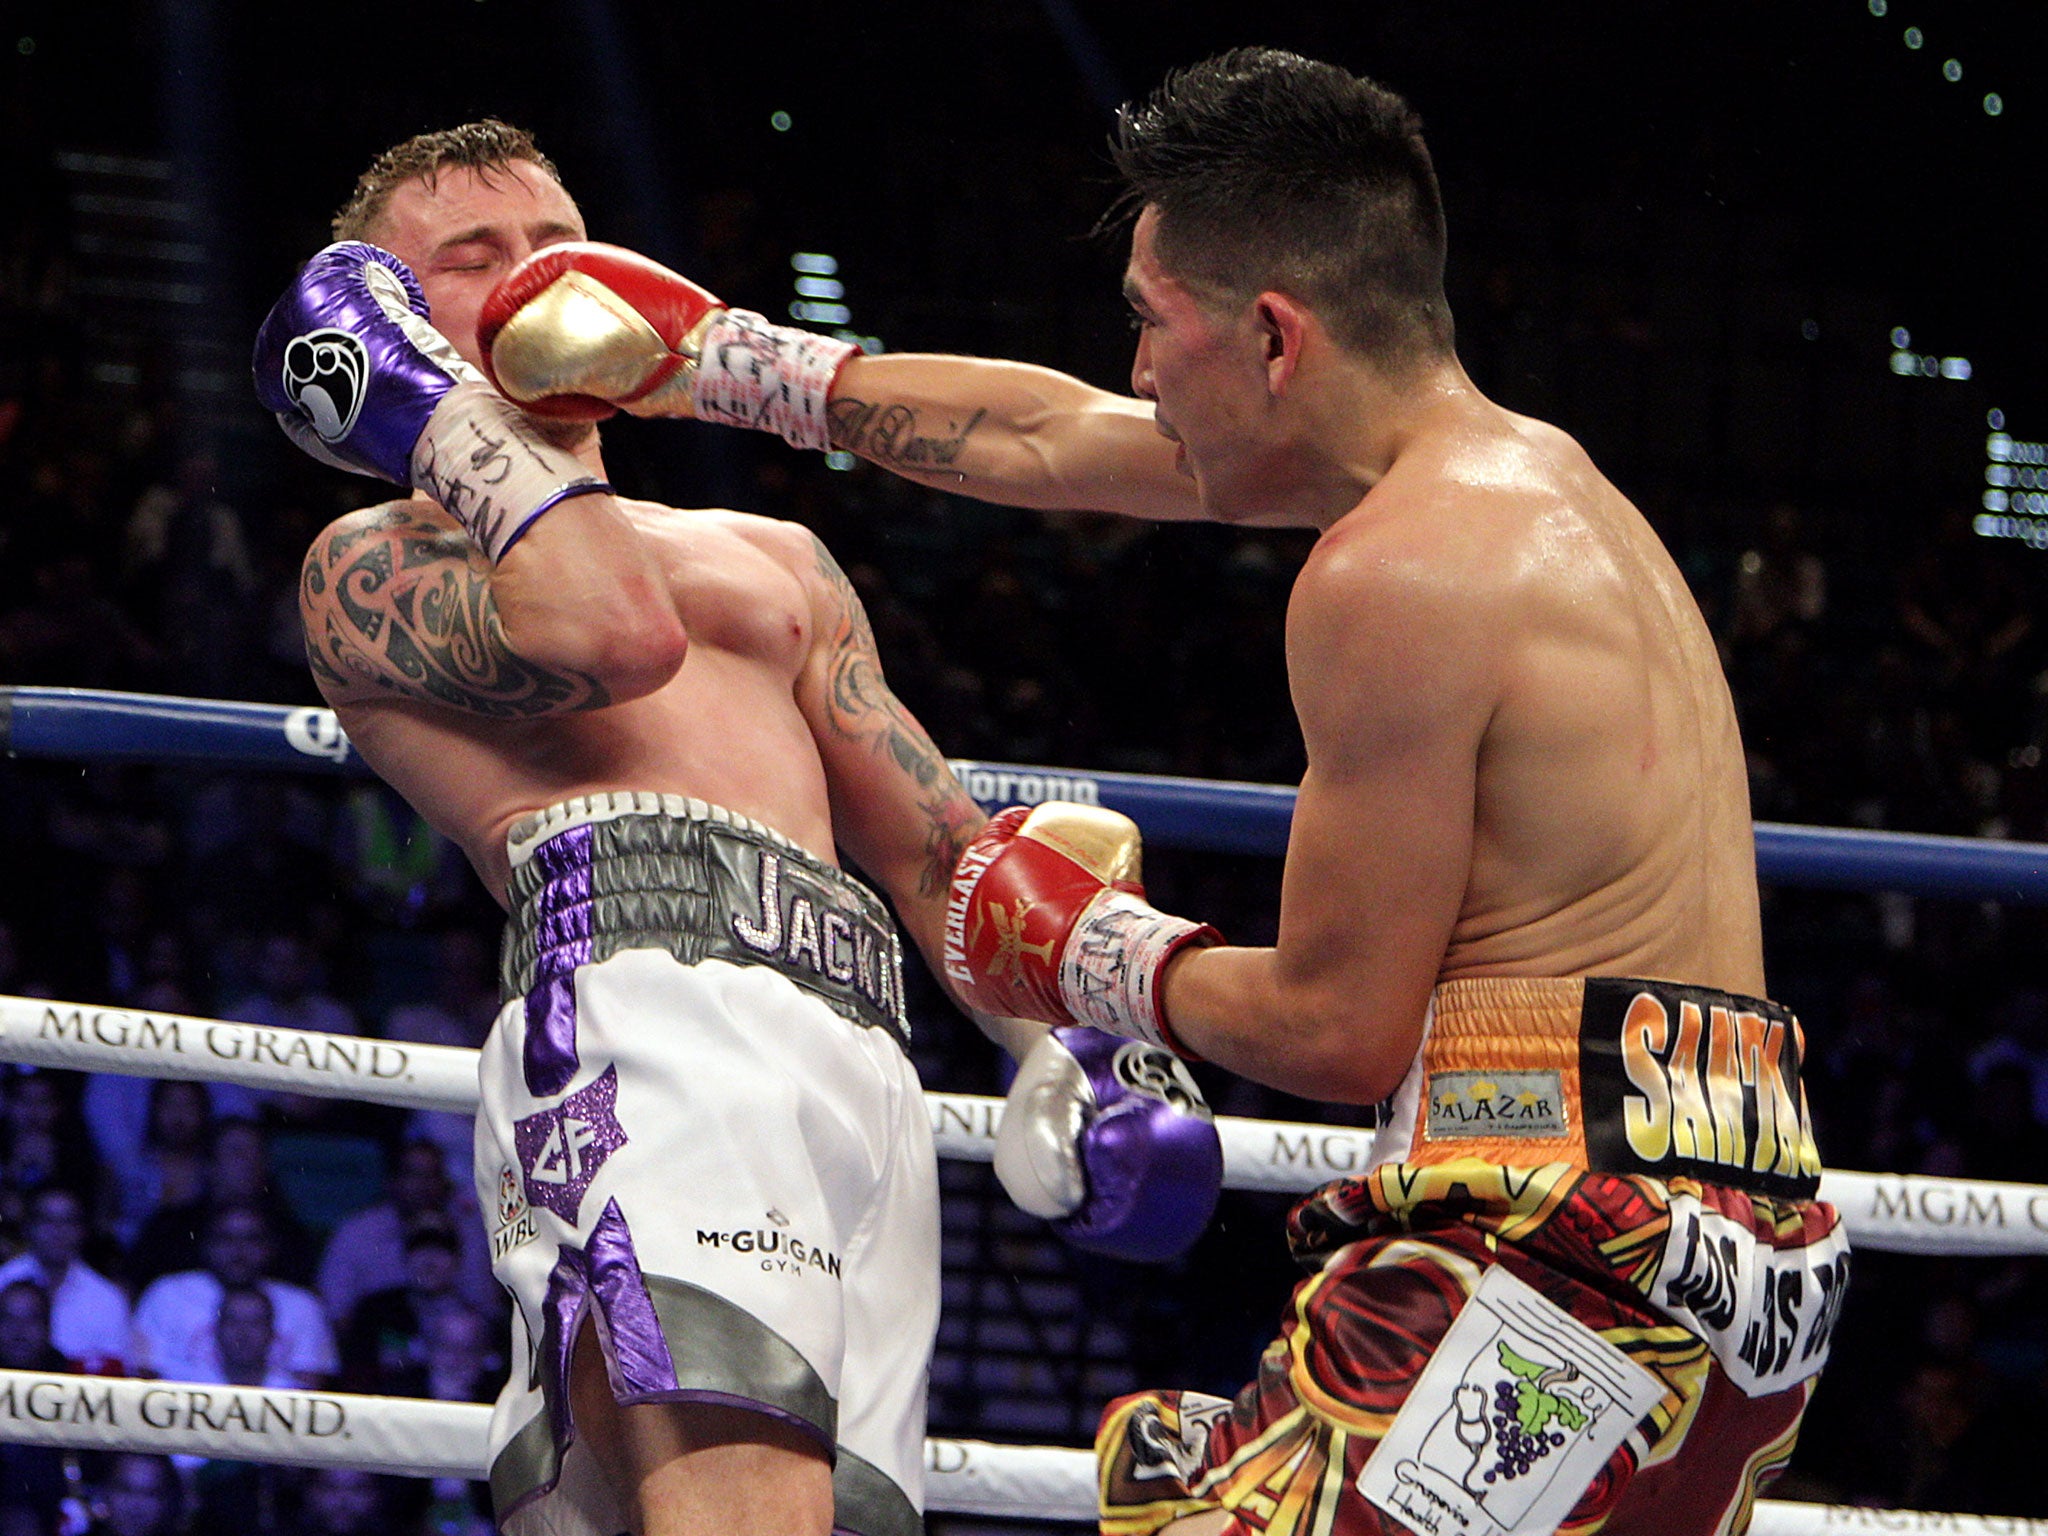 Santa Cruz catches Frampton in the face en route to a dancing victory